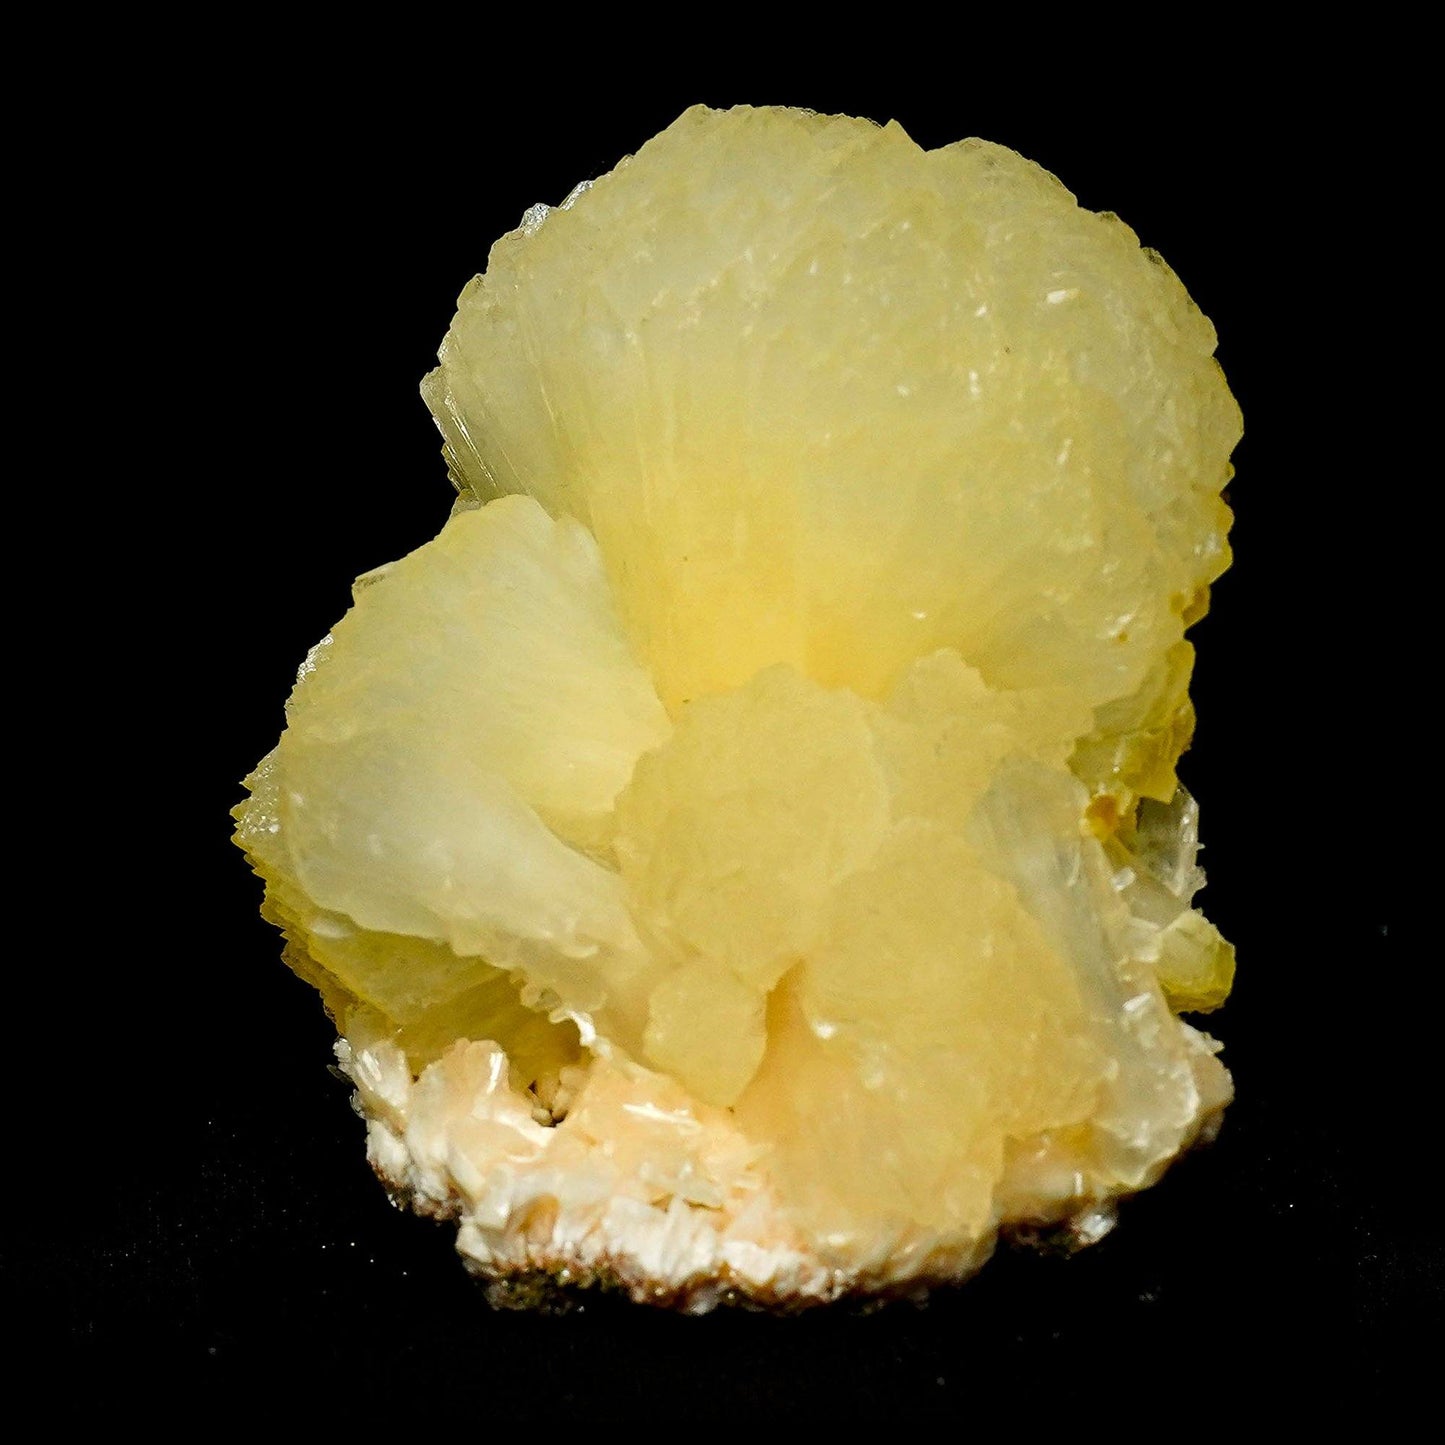 Stilbite Bow Tie Formation Natural Mineral Specimen # B 4928  https://www.superbminerals.us/products/stilbite-bow-tie-formation-natural-mineral-specimen-b-4928  Features: Decoratively embedded in the Chalcedony basalt matrix is a beautiful, big double terminated stilbite bowtie with excellent broad form and fantastic broad termination. Stilbite is a highly glossy, translucent, cream-colored mineral that is beautifully enhanced by the numerous brilliant crystals